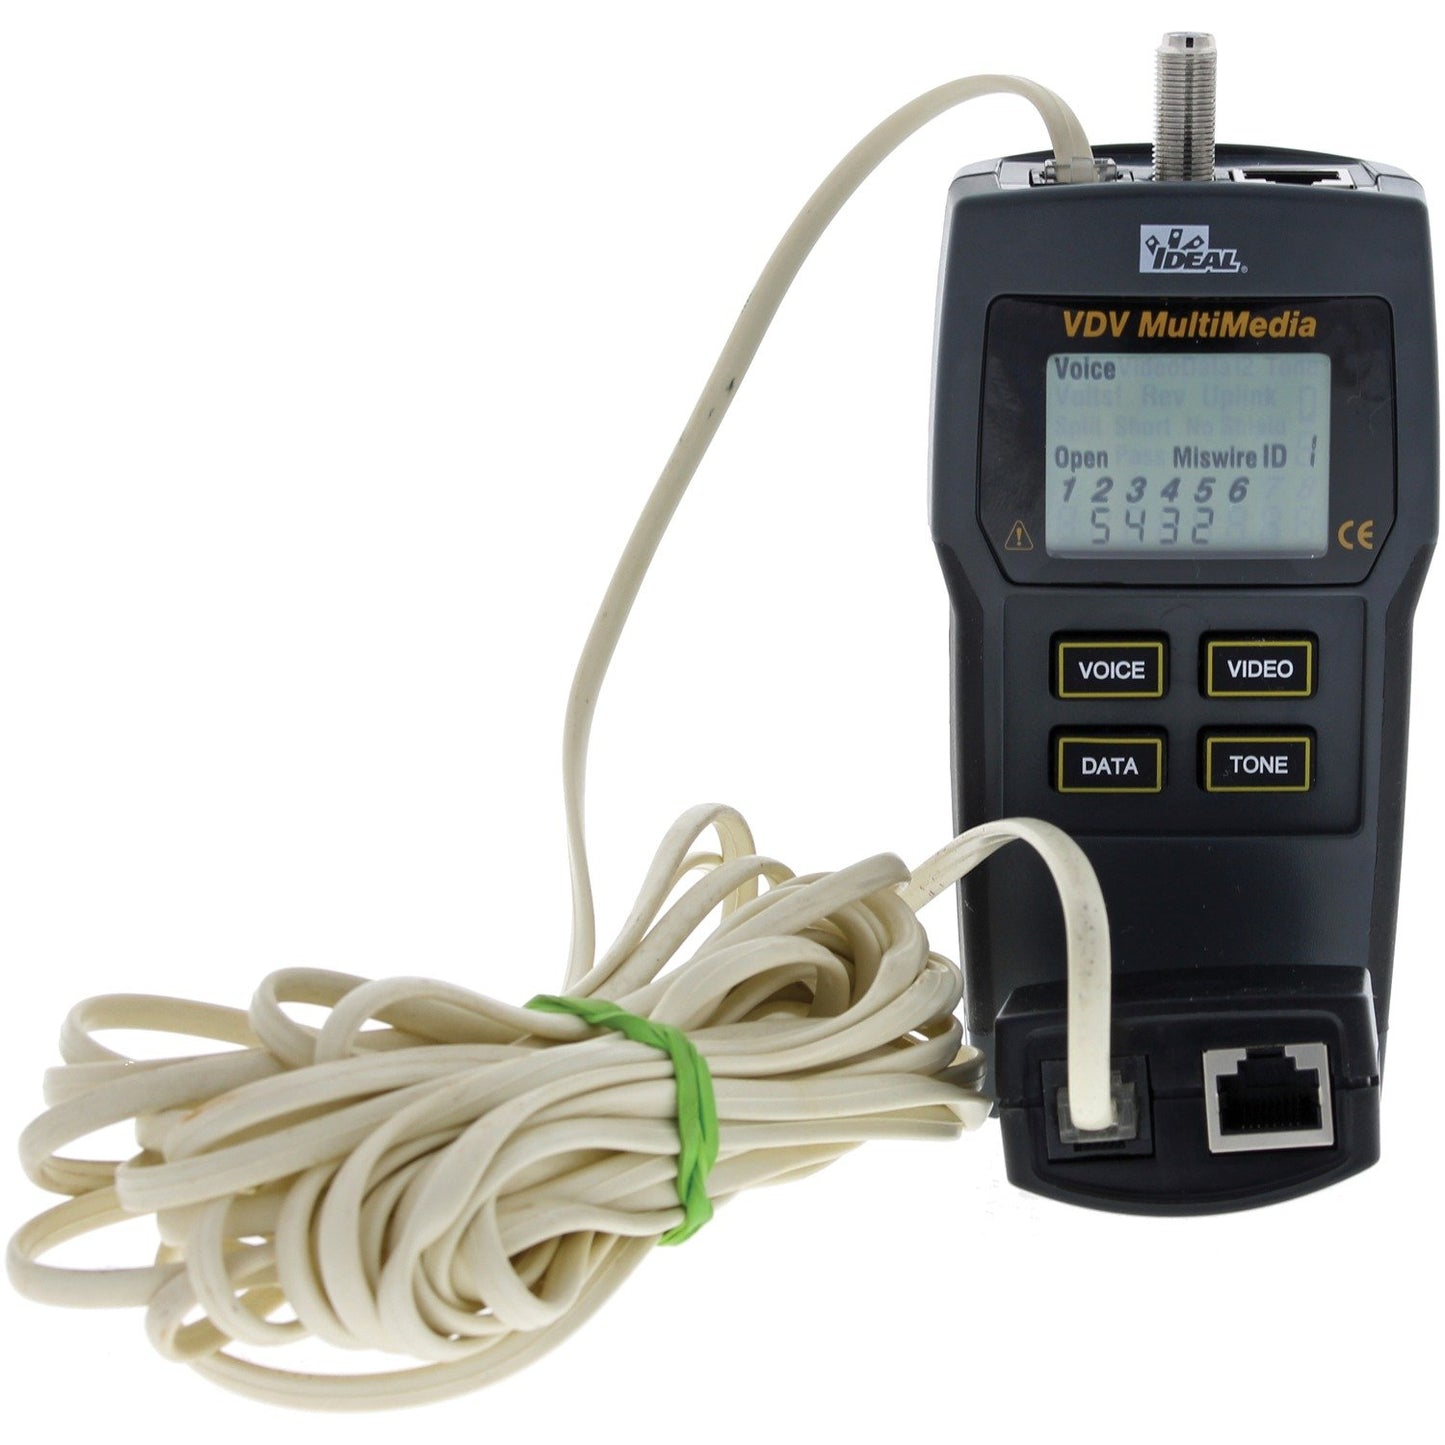 Ideal 33-856 VDV Multimedia Wiremapper and Cable Tester